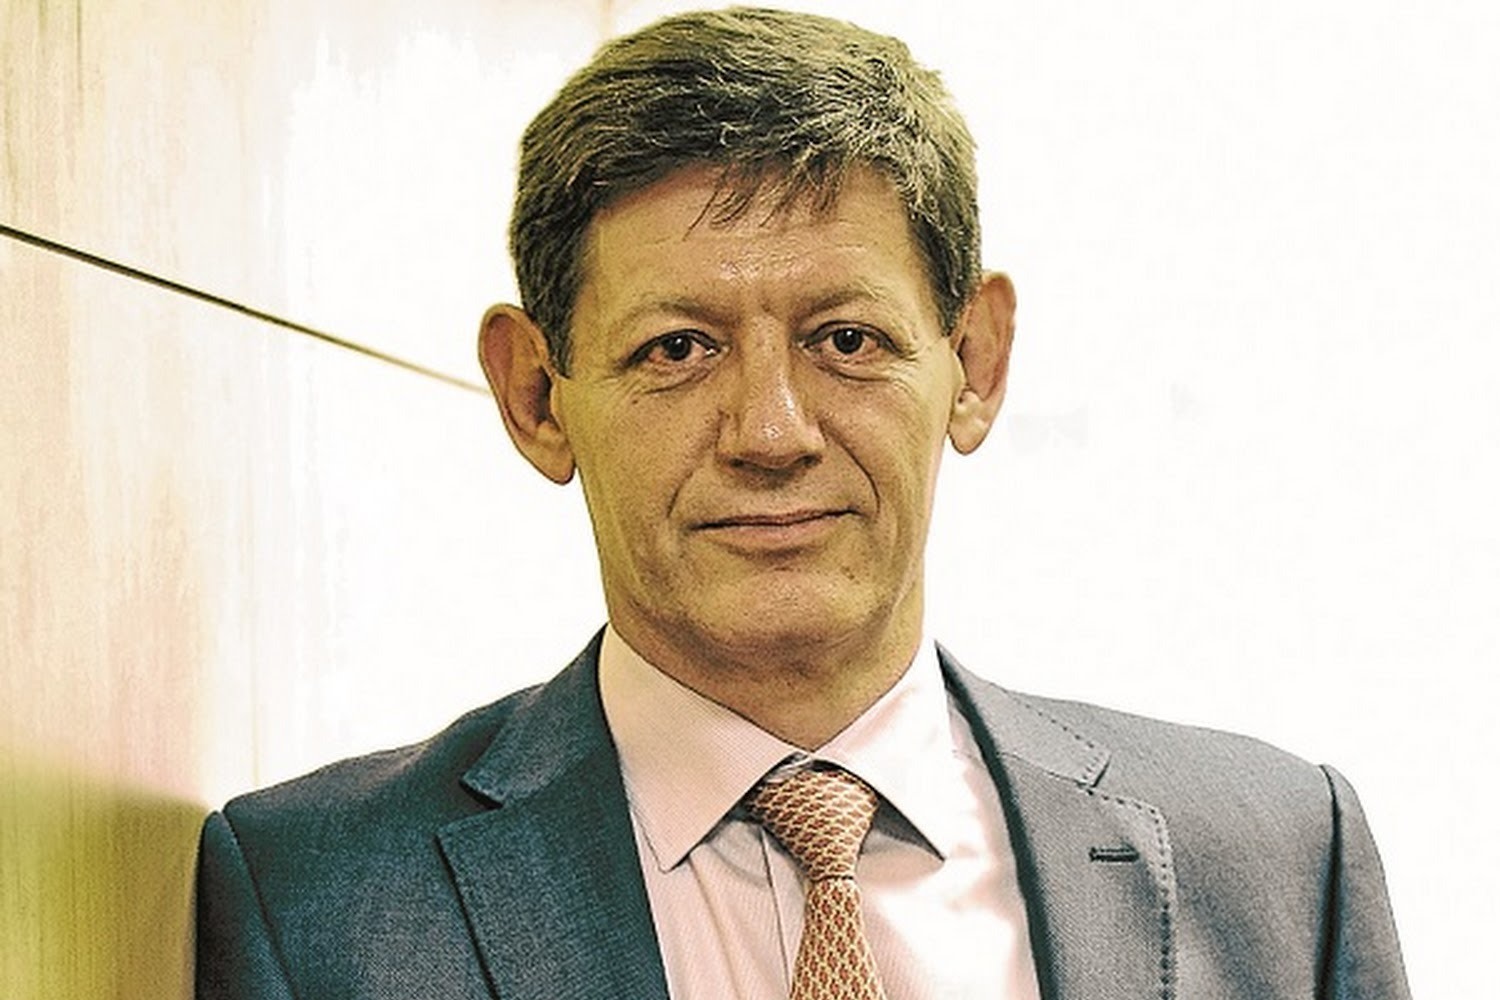 Arrie Rautenbach has been appointed Chief Executive Officer of Absa Group